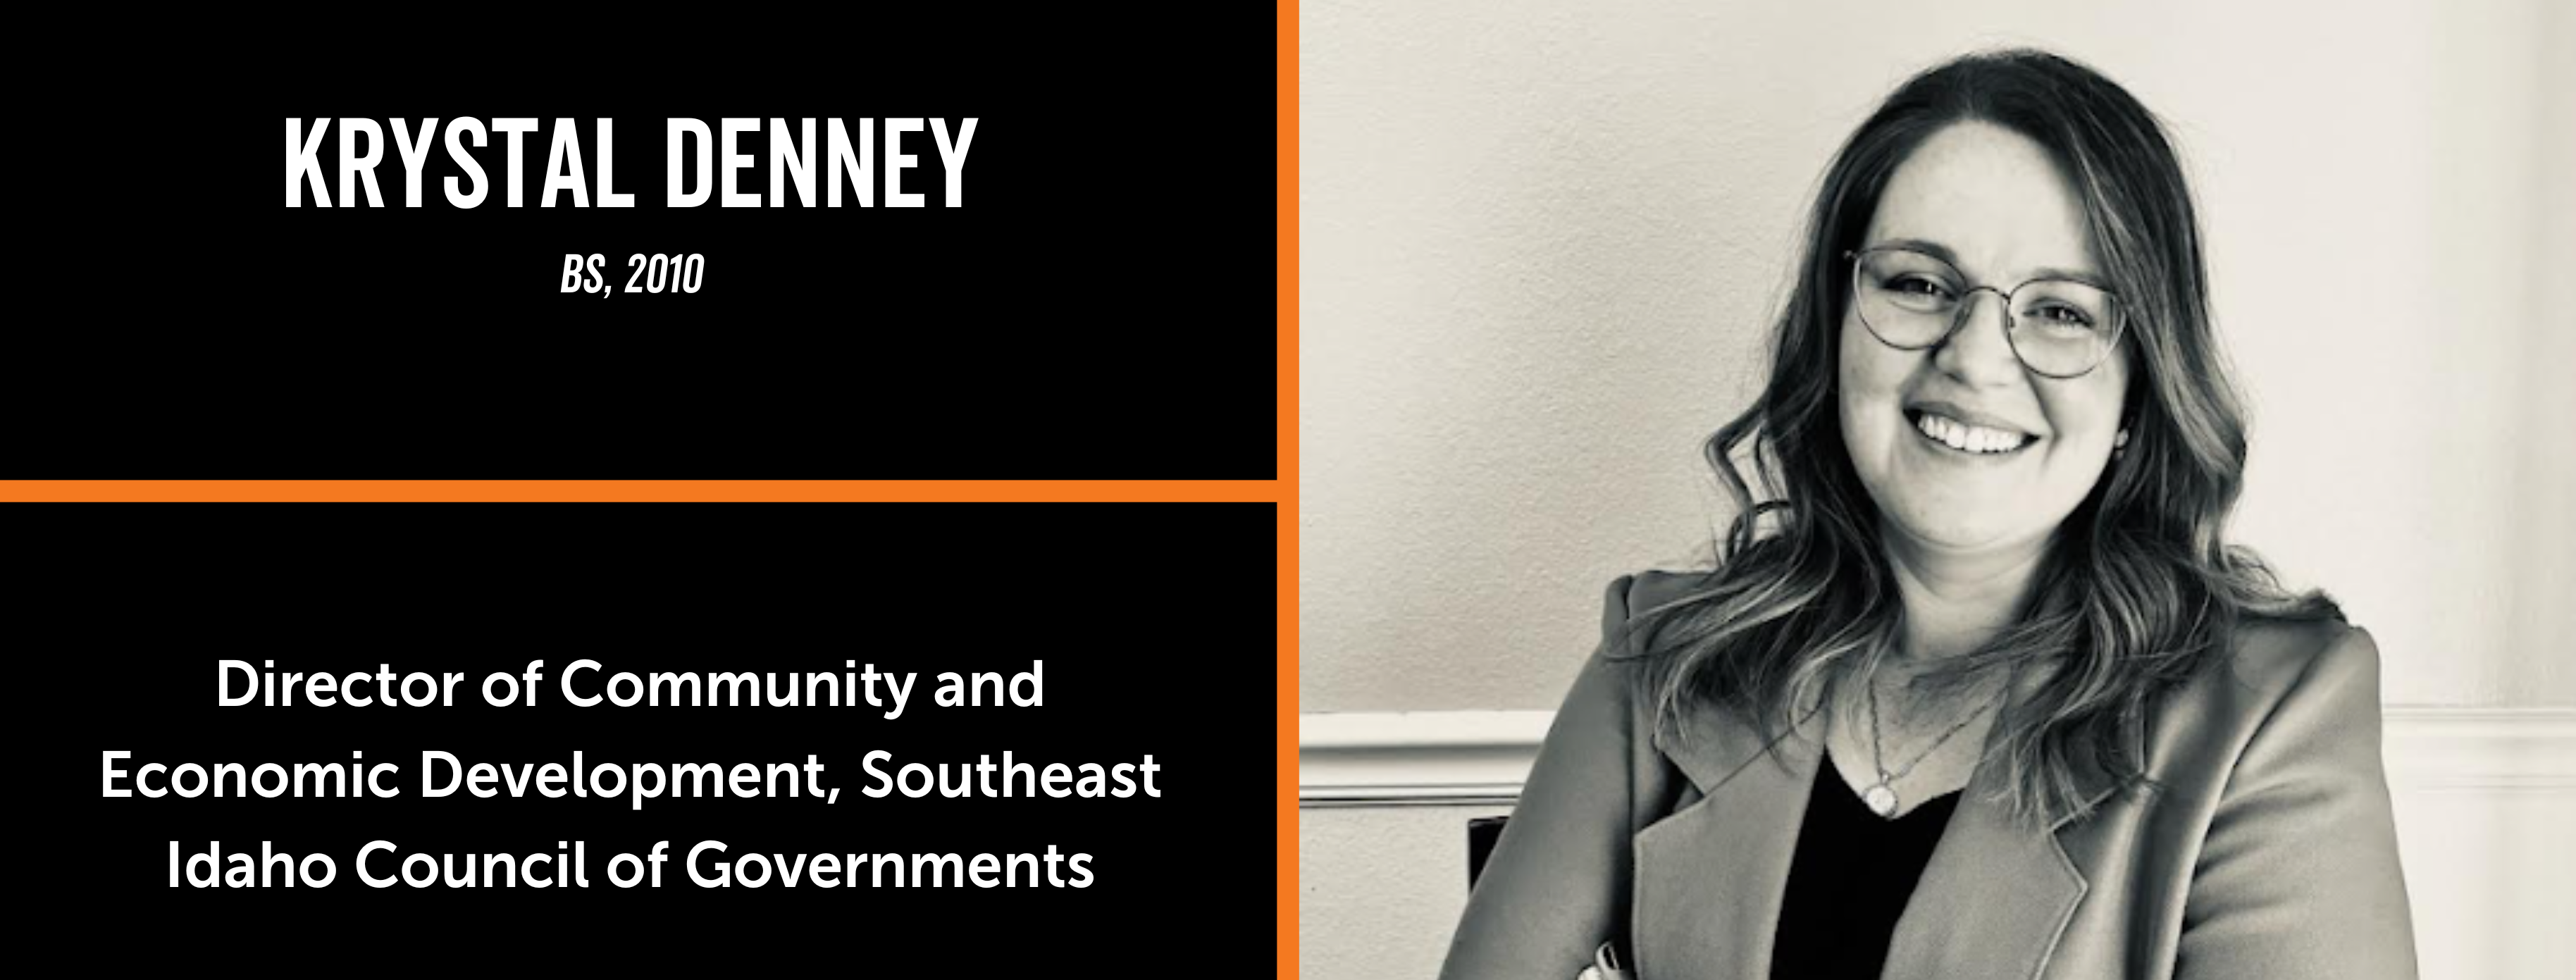 Alum Krystal Denney, BS 2010, Director of community and economic development for southeast idaho council of governments